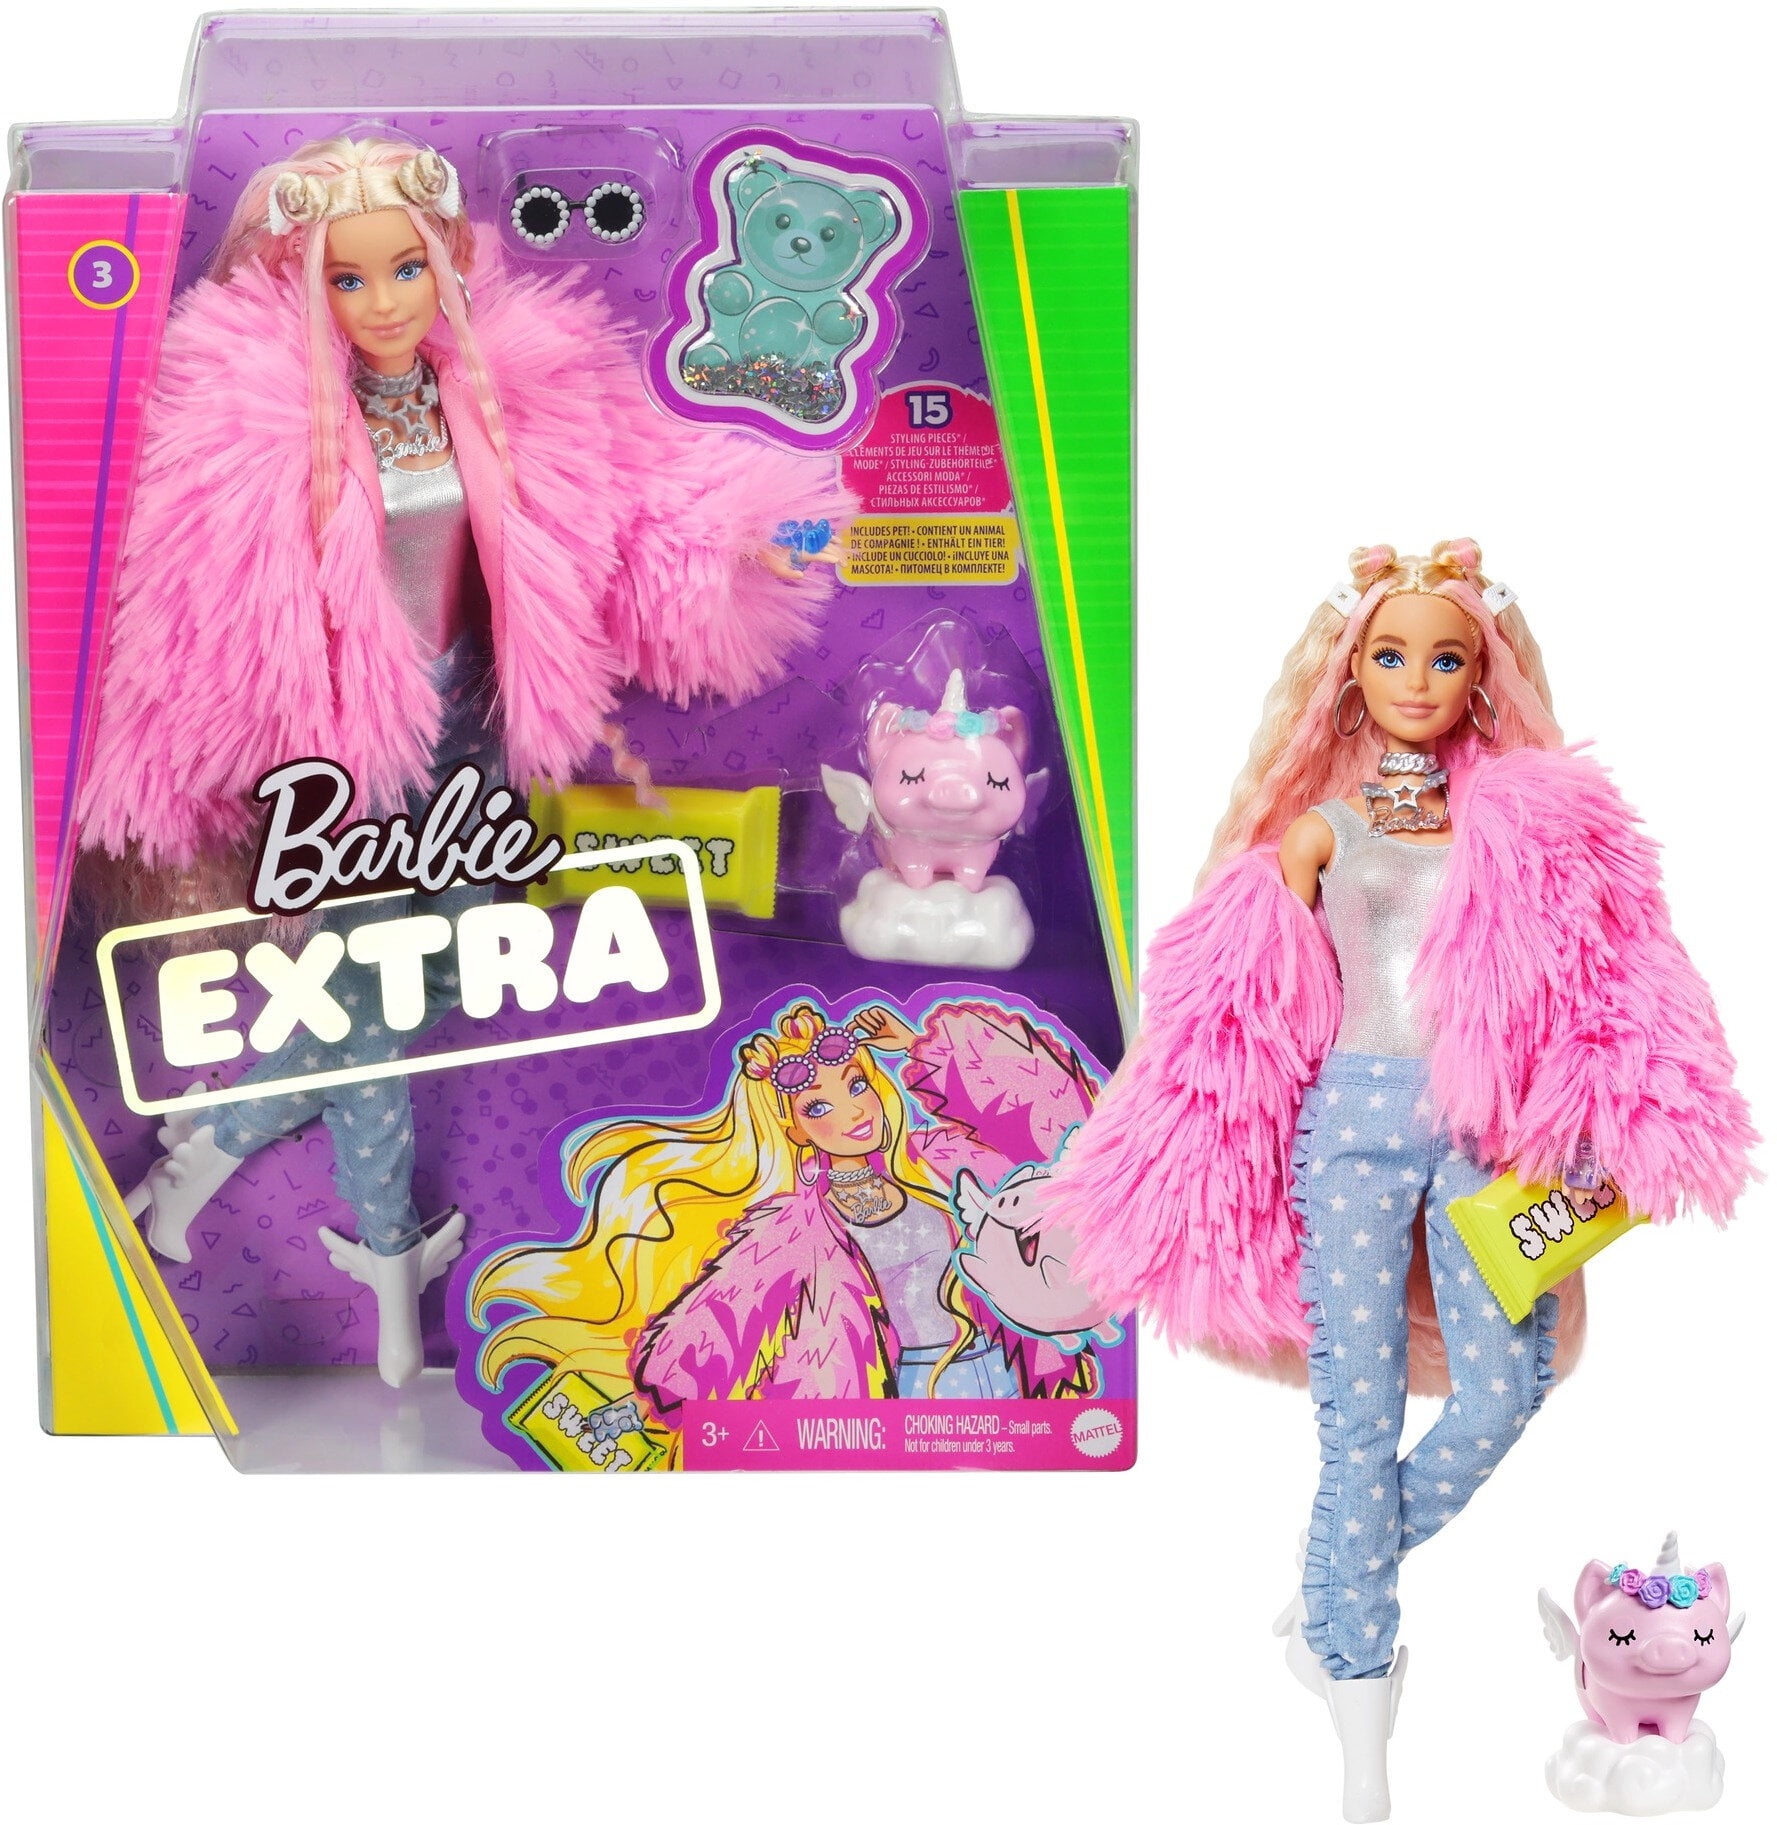 Barbie Extra Doll #3 in Pink Coat Pet Unicorn-Pig for Old & Up - Walmart.com